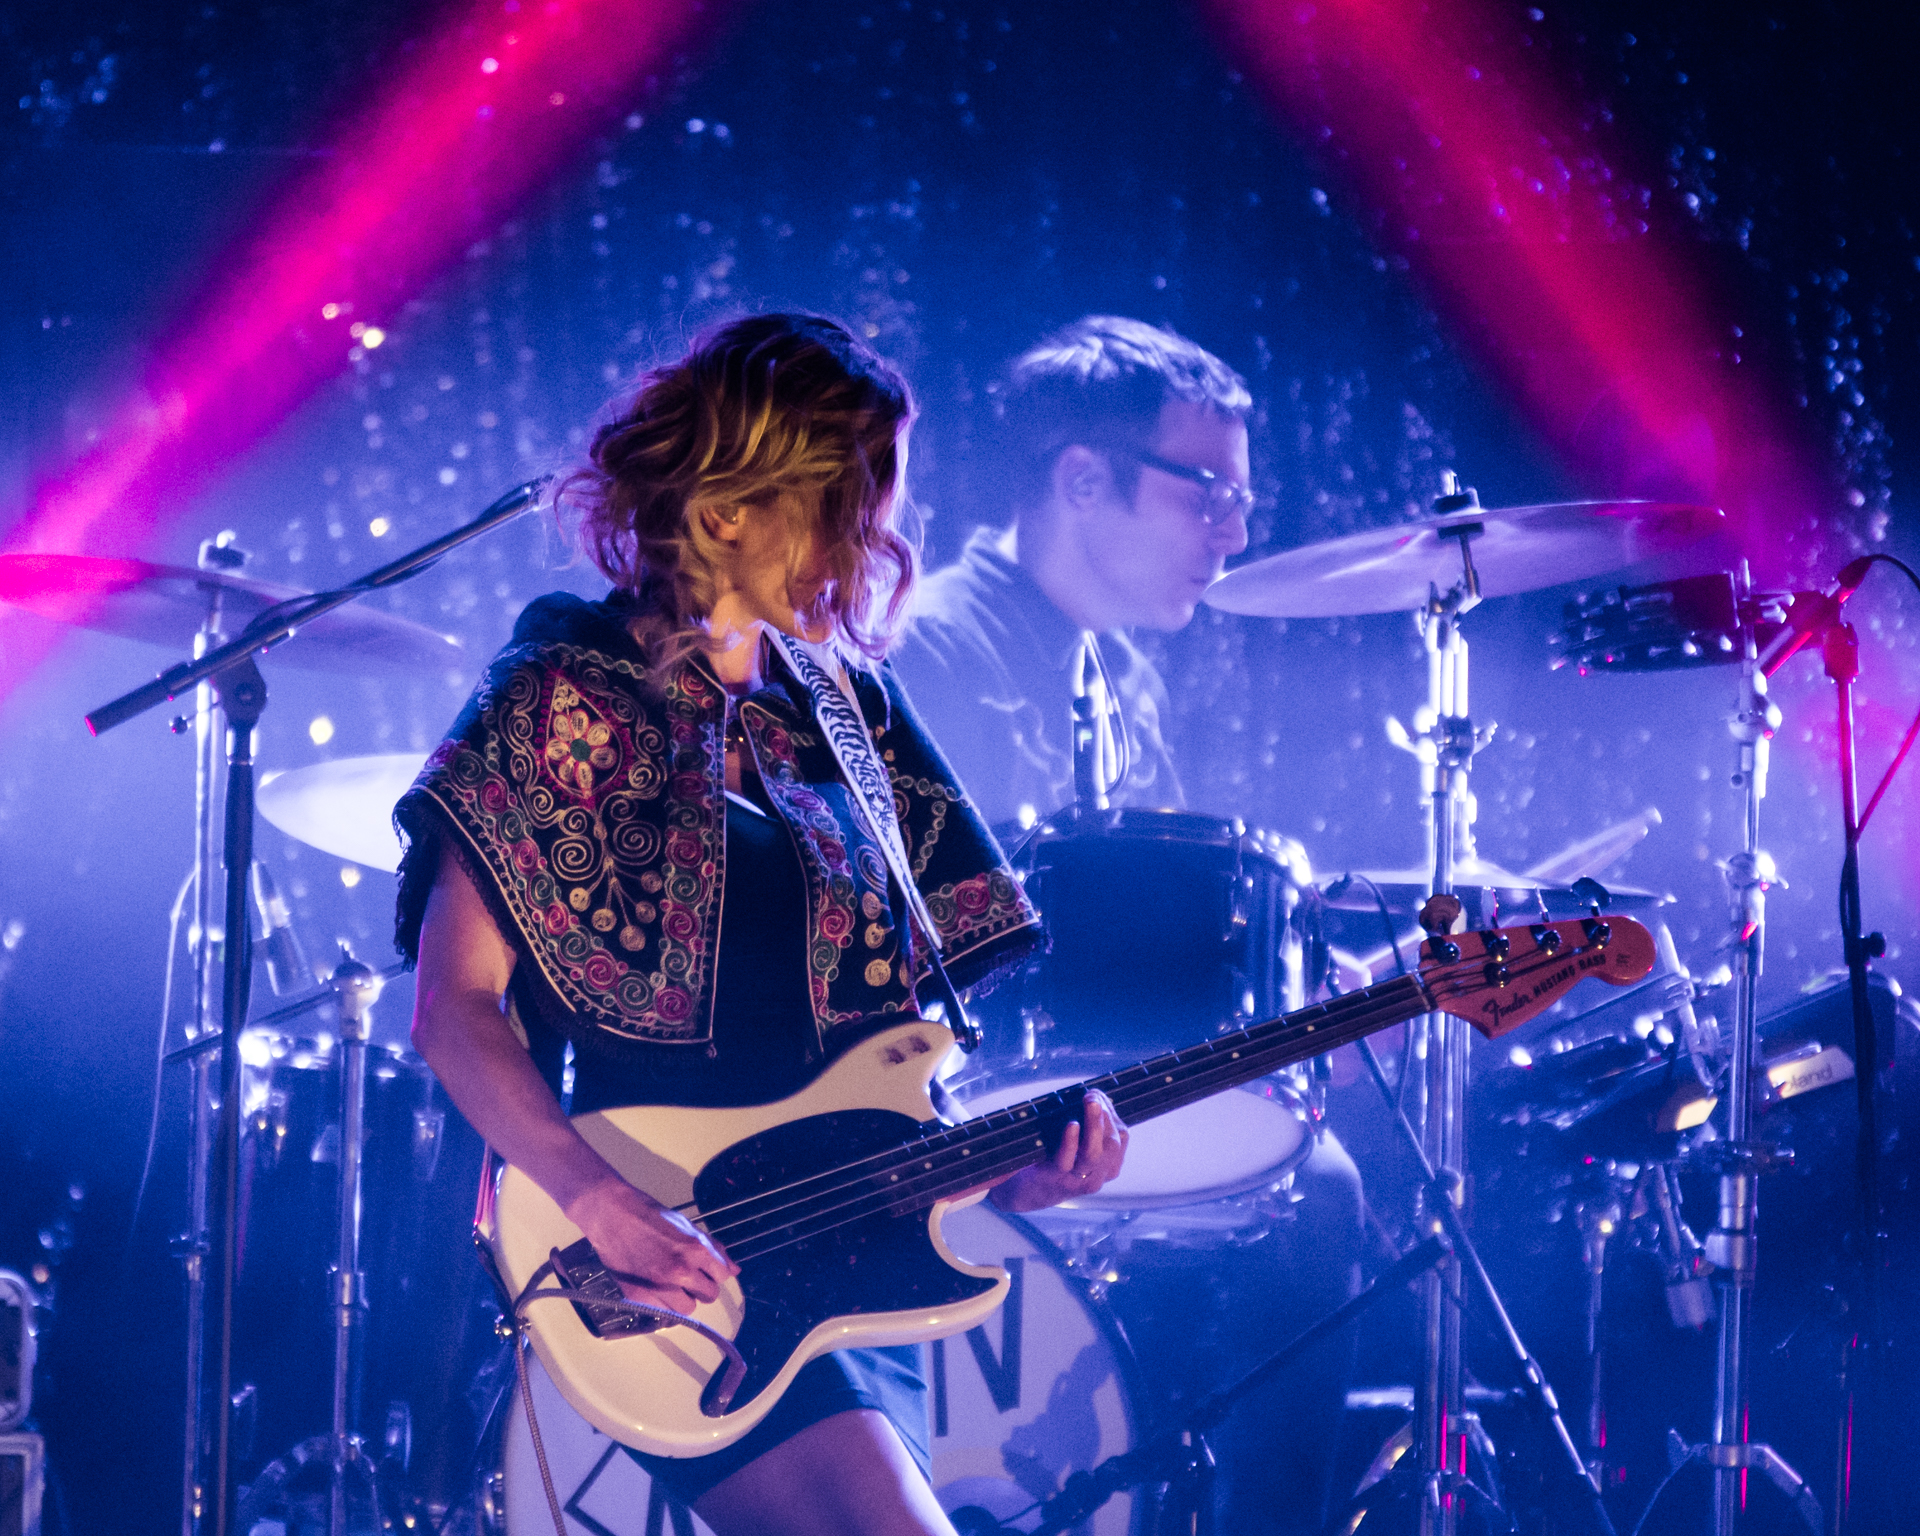 Melissa McClelland takes the stage in vibrant style, adorned in a brightly colored patterned shawl, playing a white electric guitar. The drummer provides a rhythmic backdrop, while the blue-lit stage is framed by two neon pink light rays, creating a visually dynamic and energetic scene.